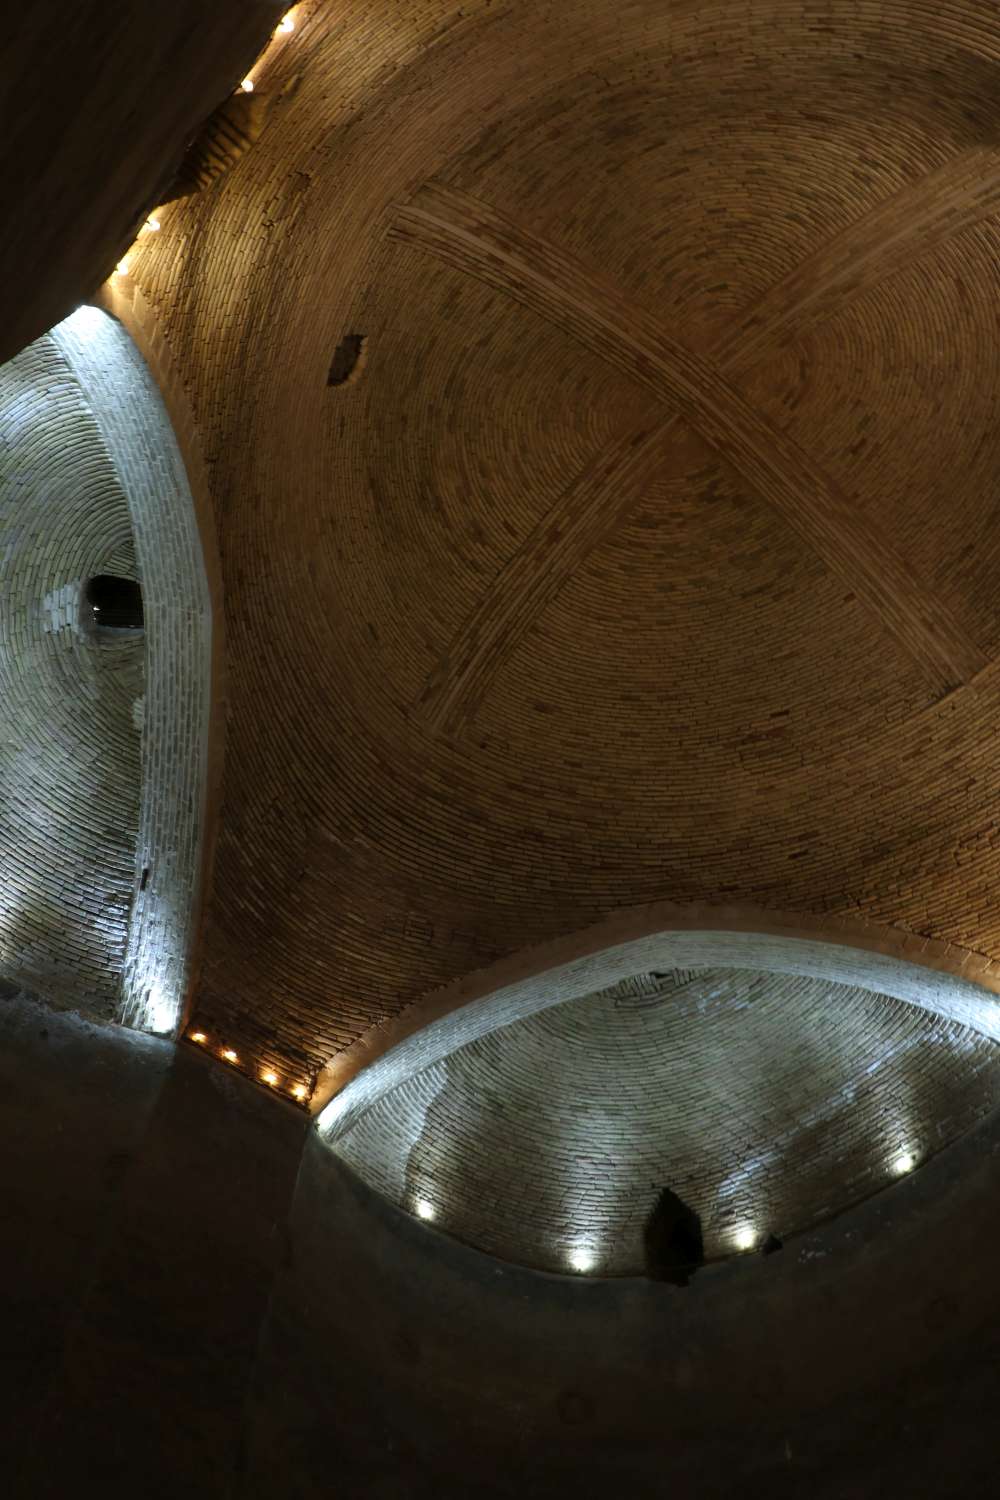 Dome of cistern.